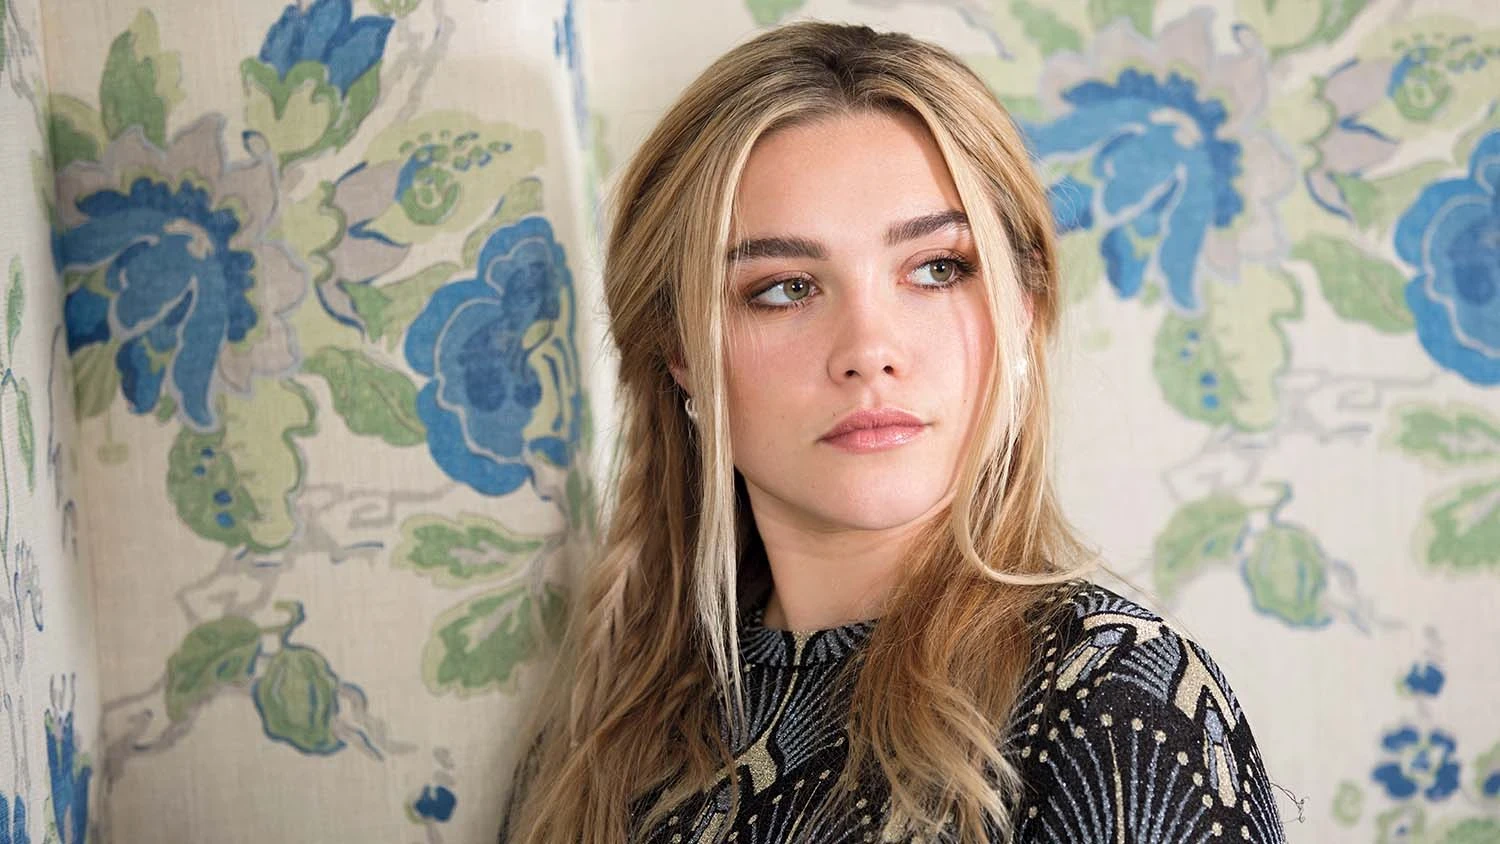 Florence Pugh was asked to modify eyebrows